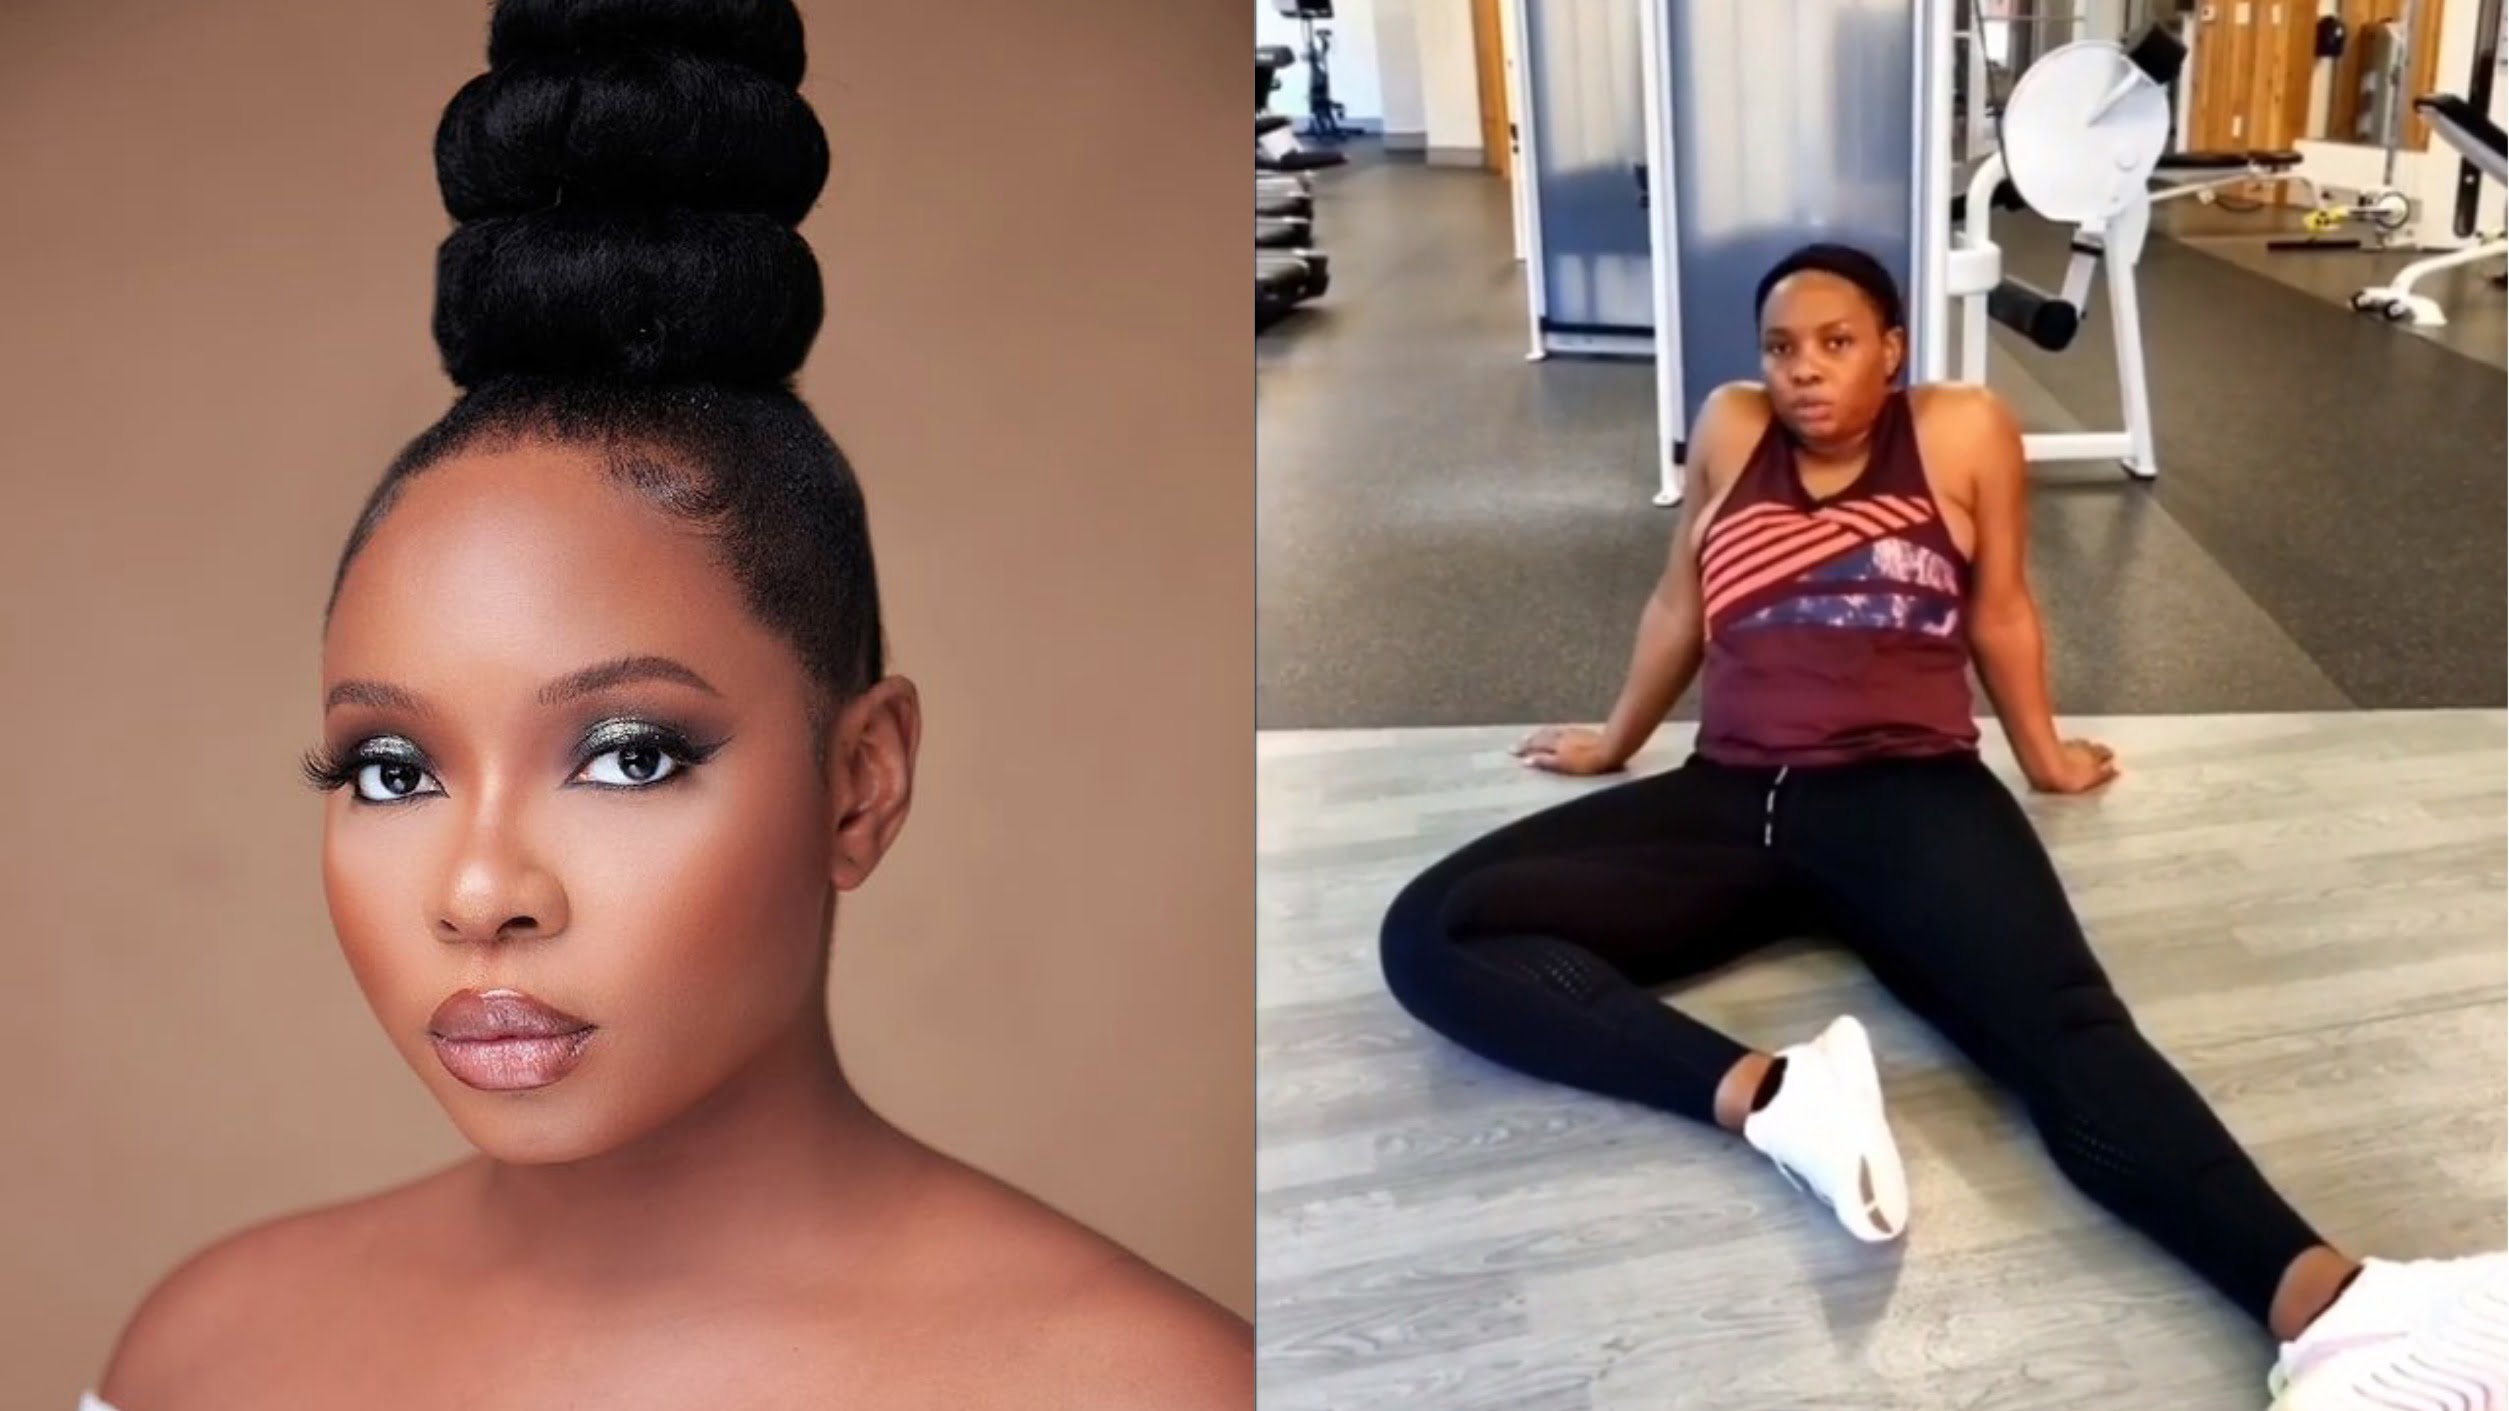 Why I won’t be going back to Gym – Yemi Alade (Video)